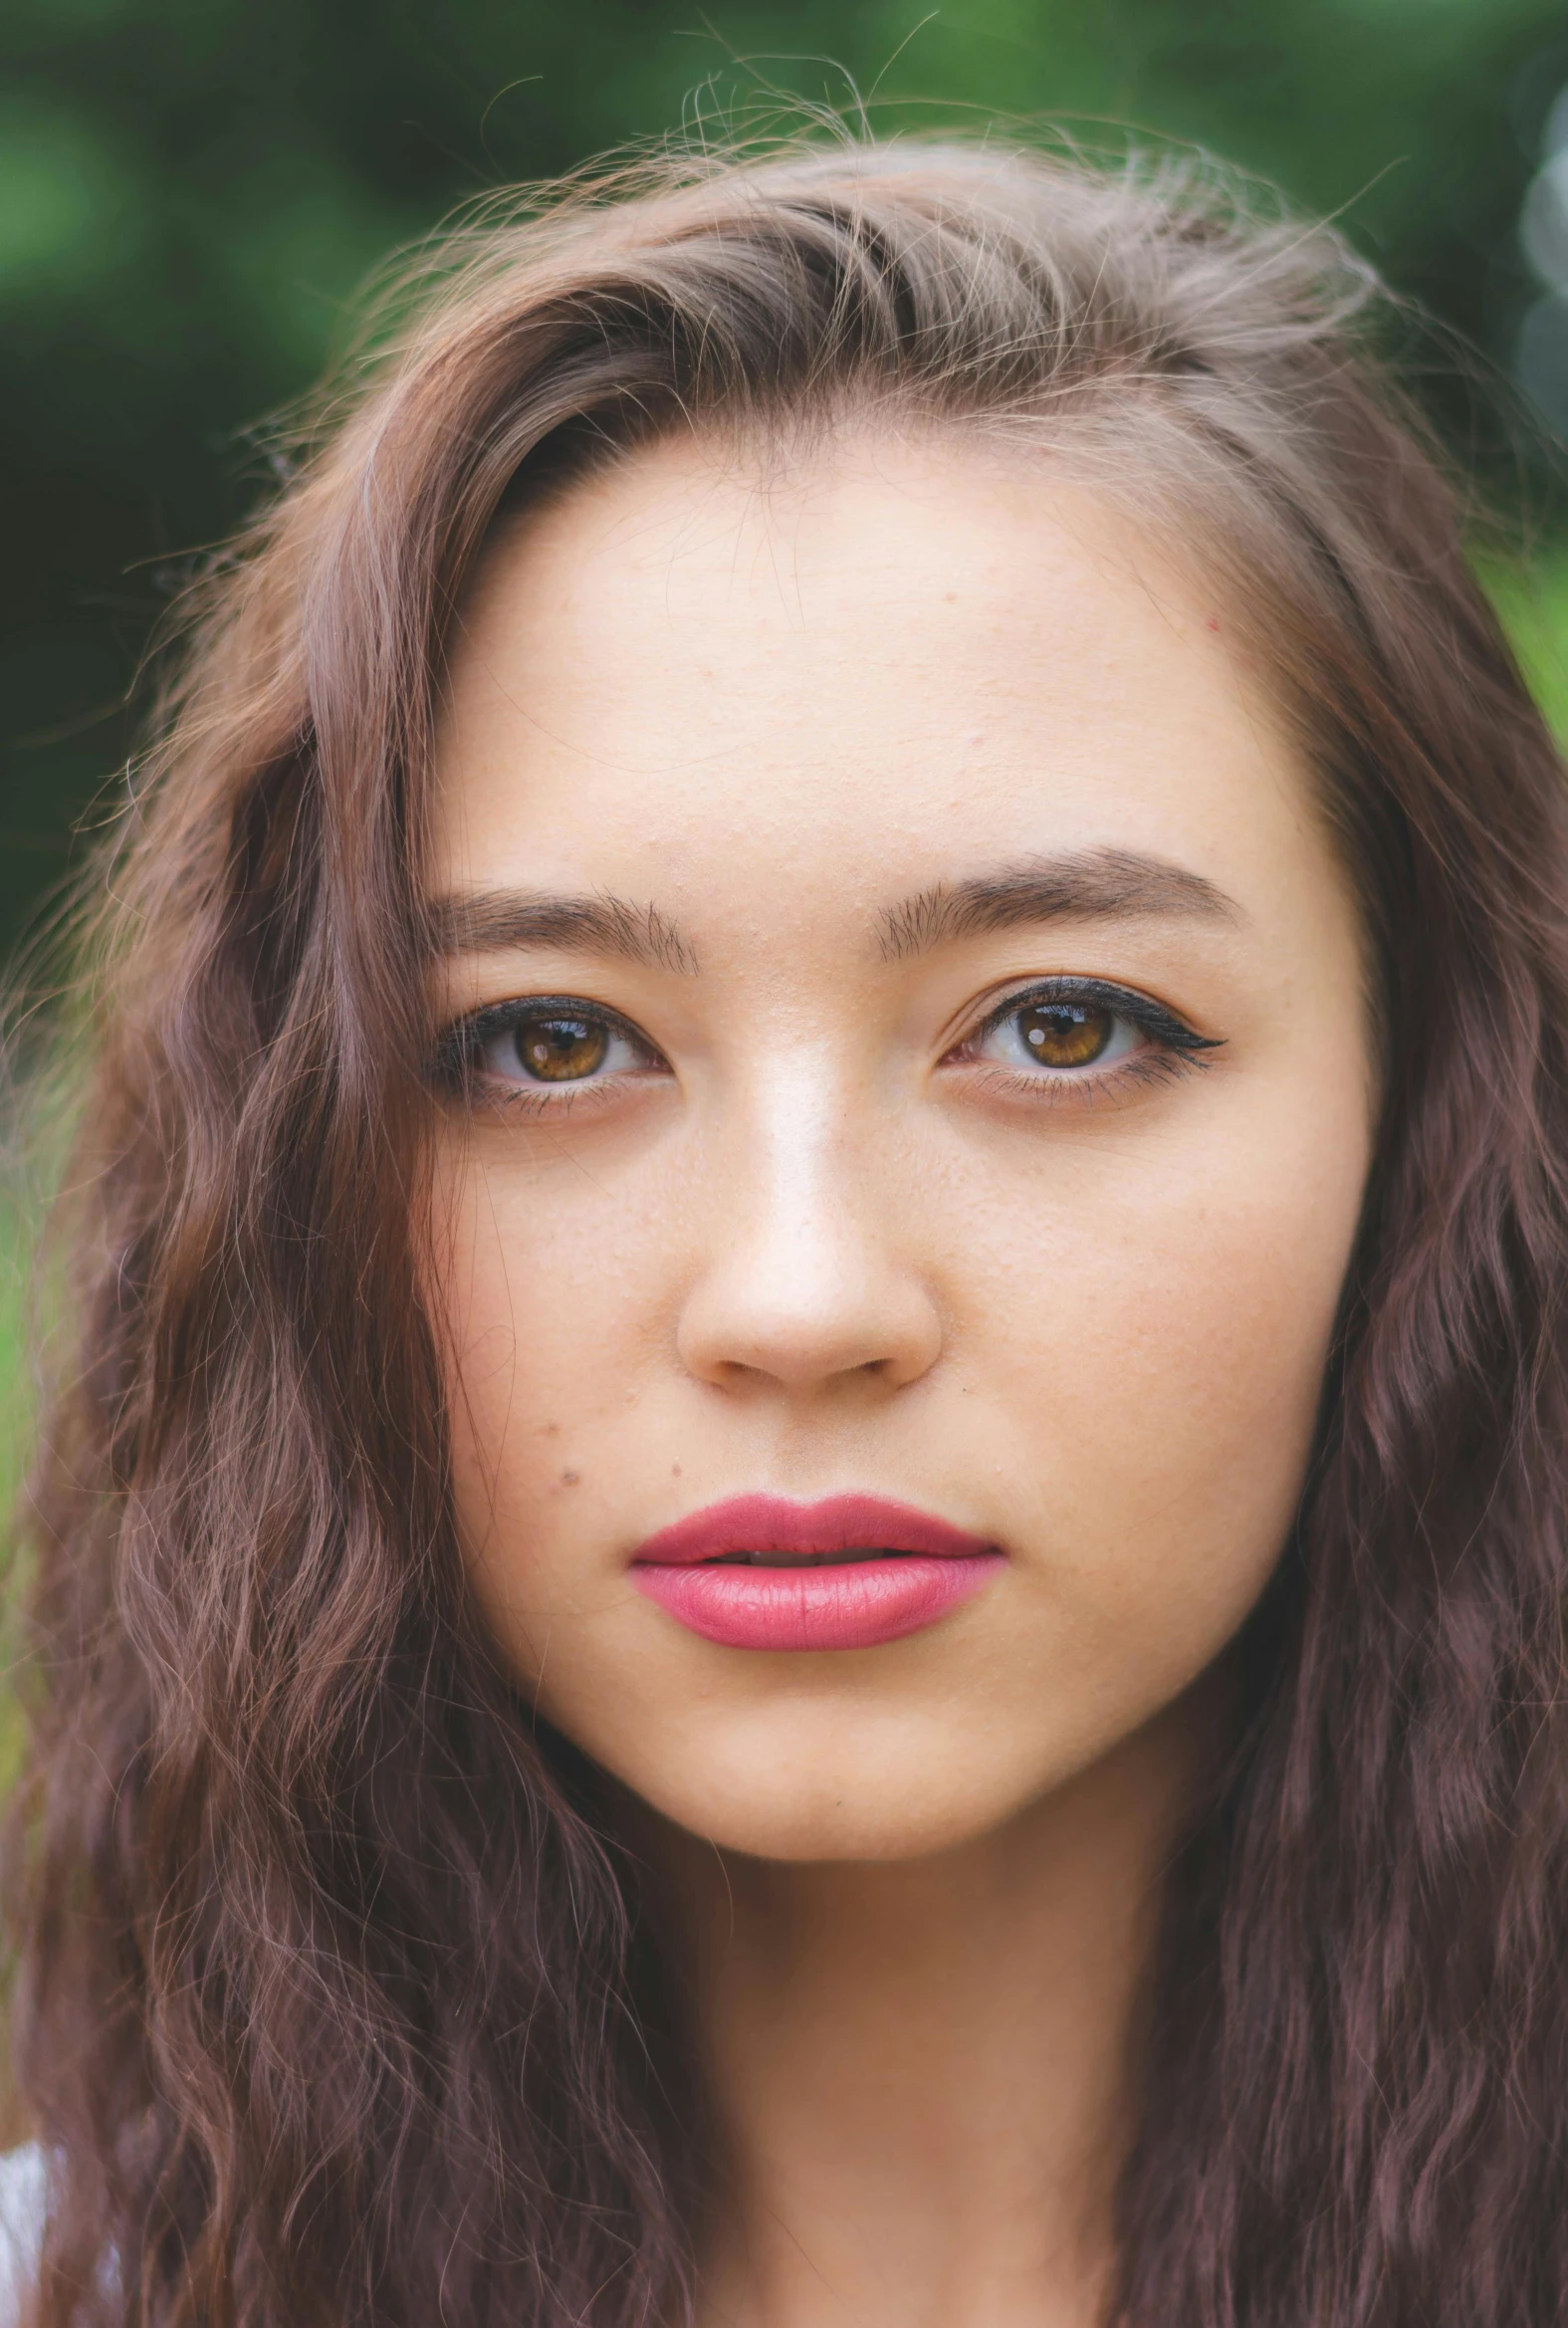 a close up of a woman with long hair, portrait sophie mudd, south east asian with round face, mixed-race woman, shot on sony a 7